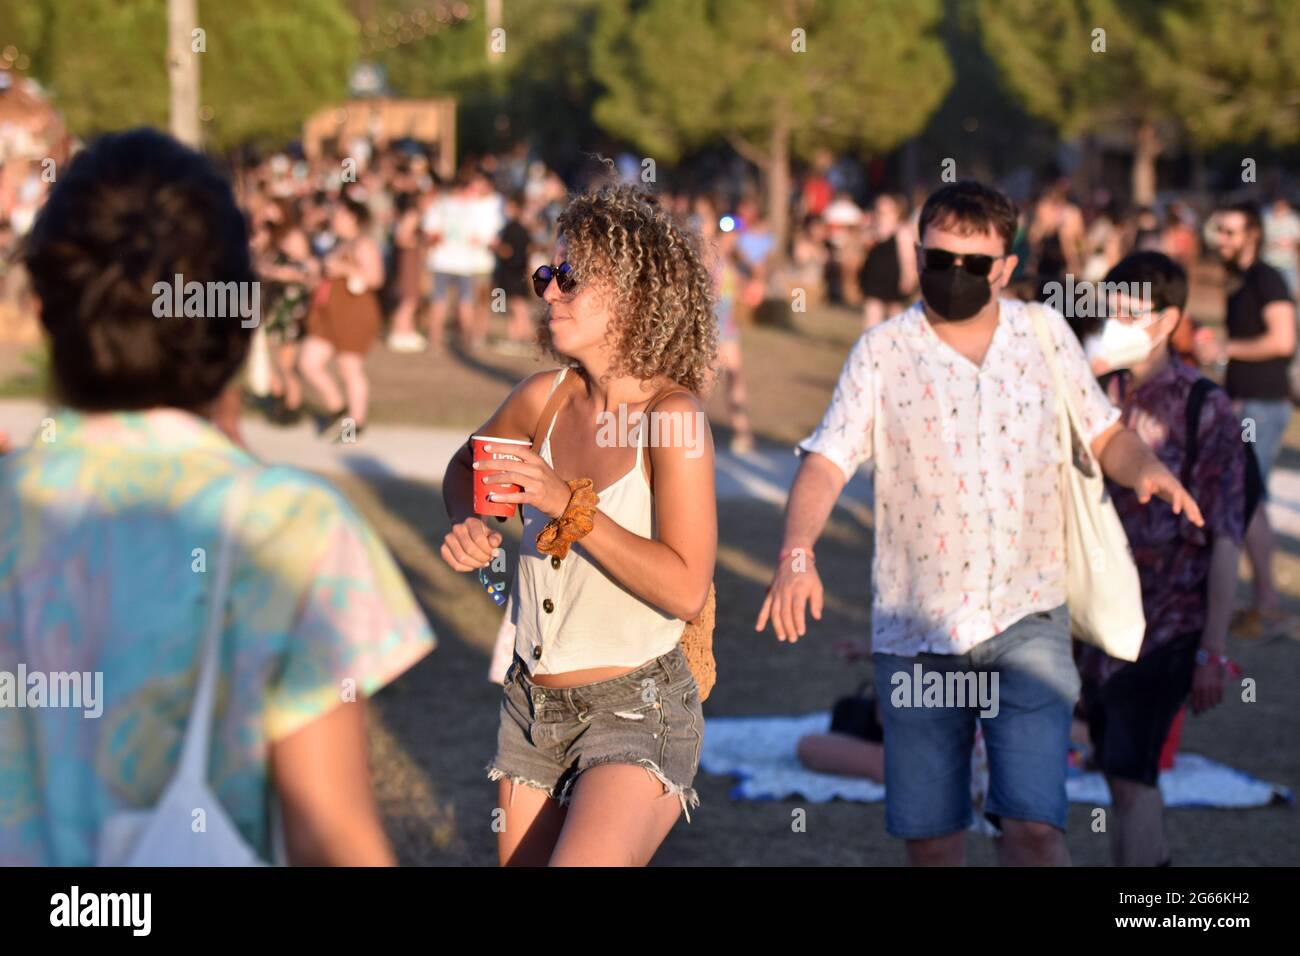 People are seen dancing at the Vida 2021 Festival.Vida 2021, an international festival that is held in the city of Vilanova i la Geltru (Barcelona) for three days and that with more than 50 live performances brings together author music, pop, rock, electronic music and indie music. Festival Vida 2021 tries to offer an experience of music, nature, sea, art and gastronomy in a bucolic setting in several stages in the same place. Stock Photo